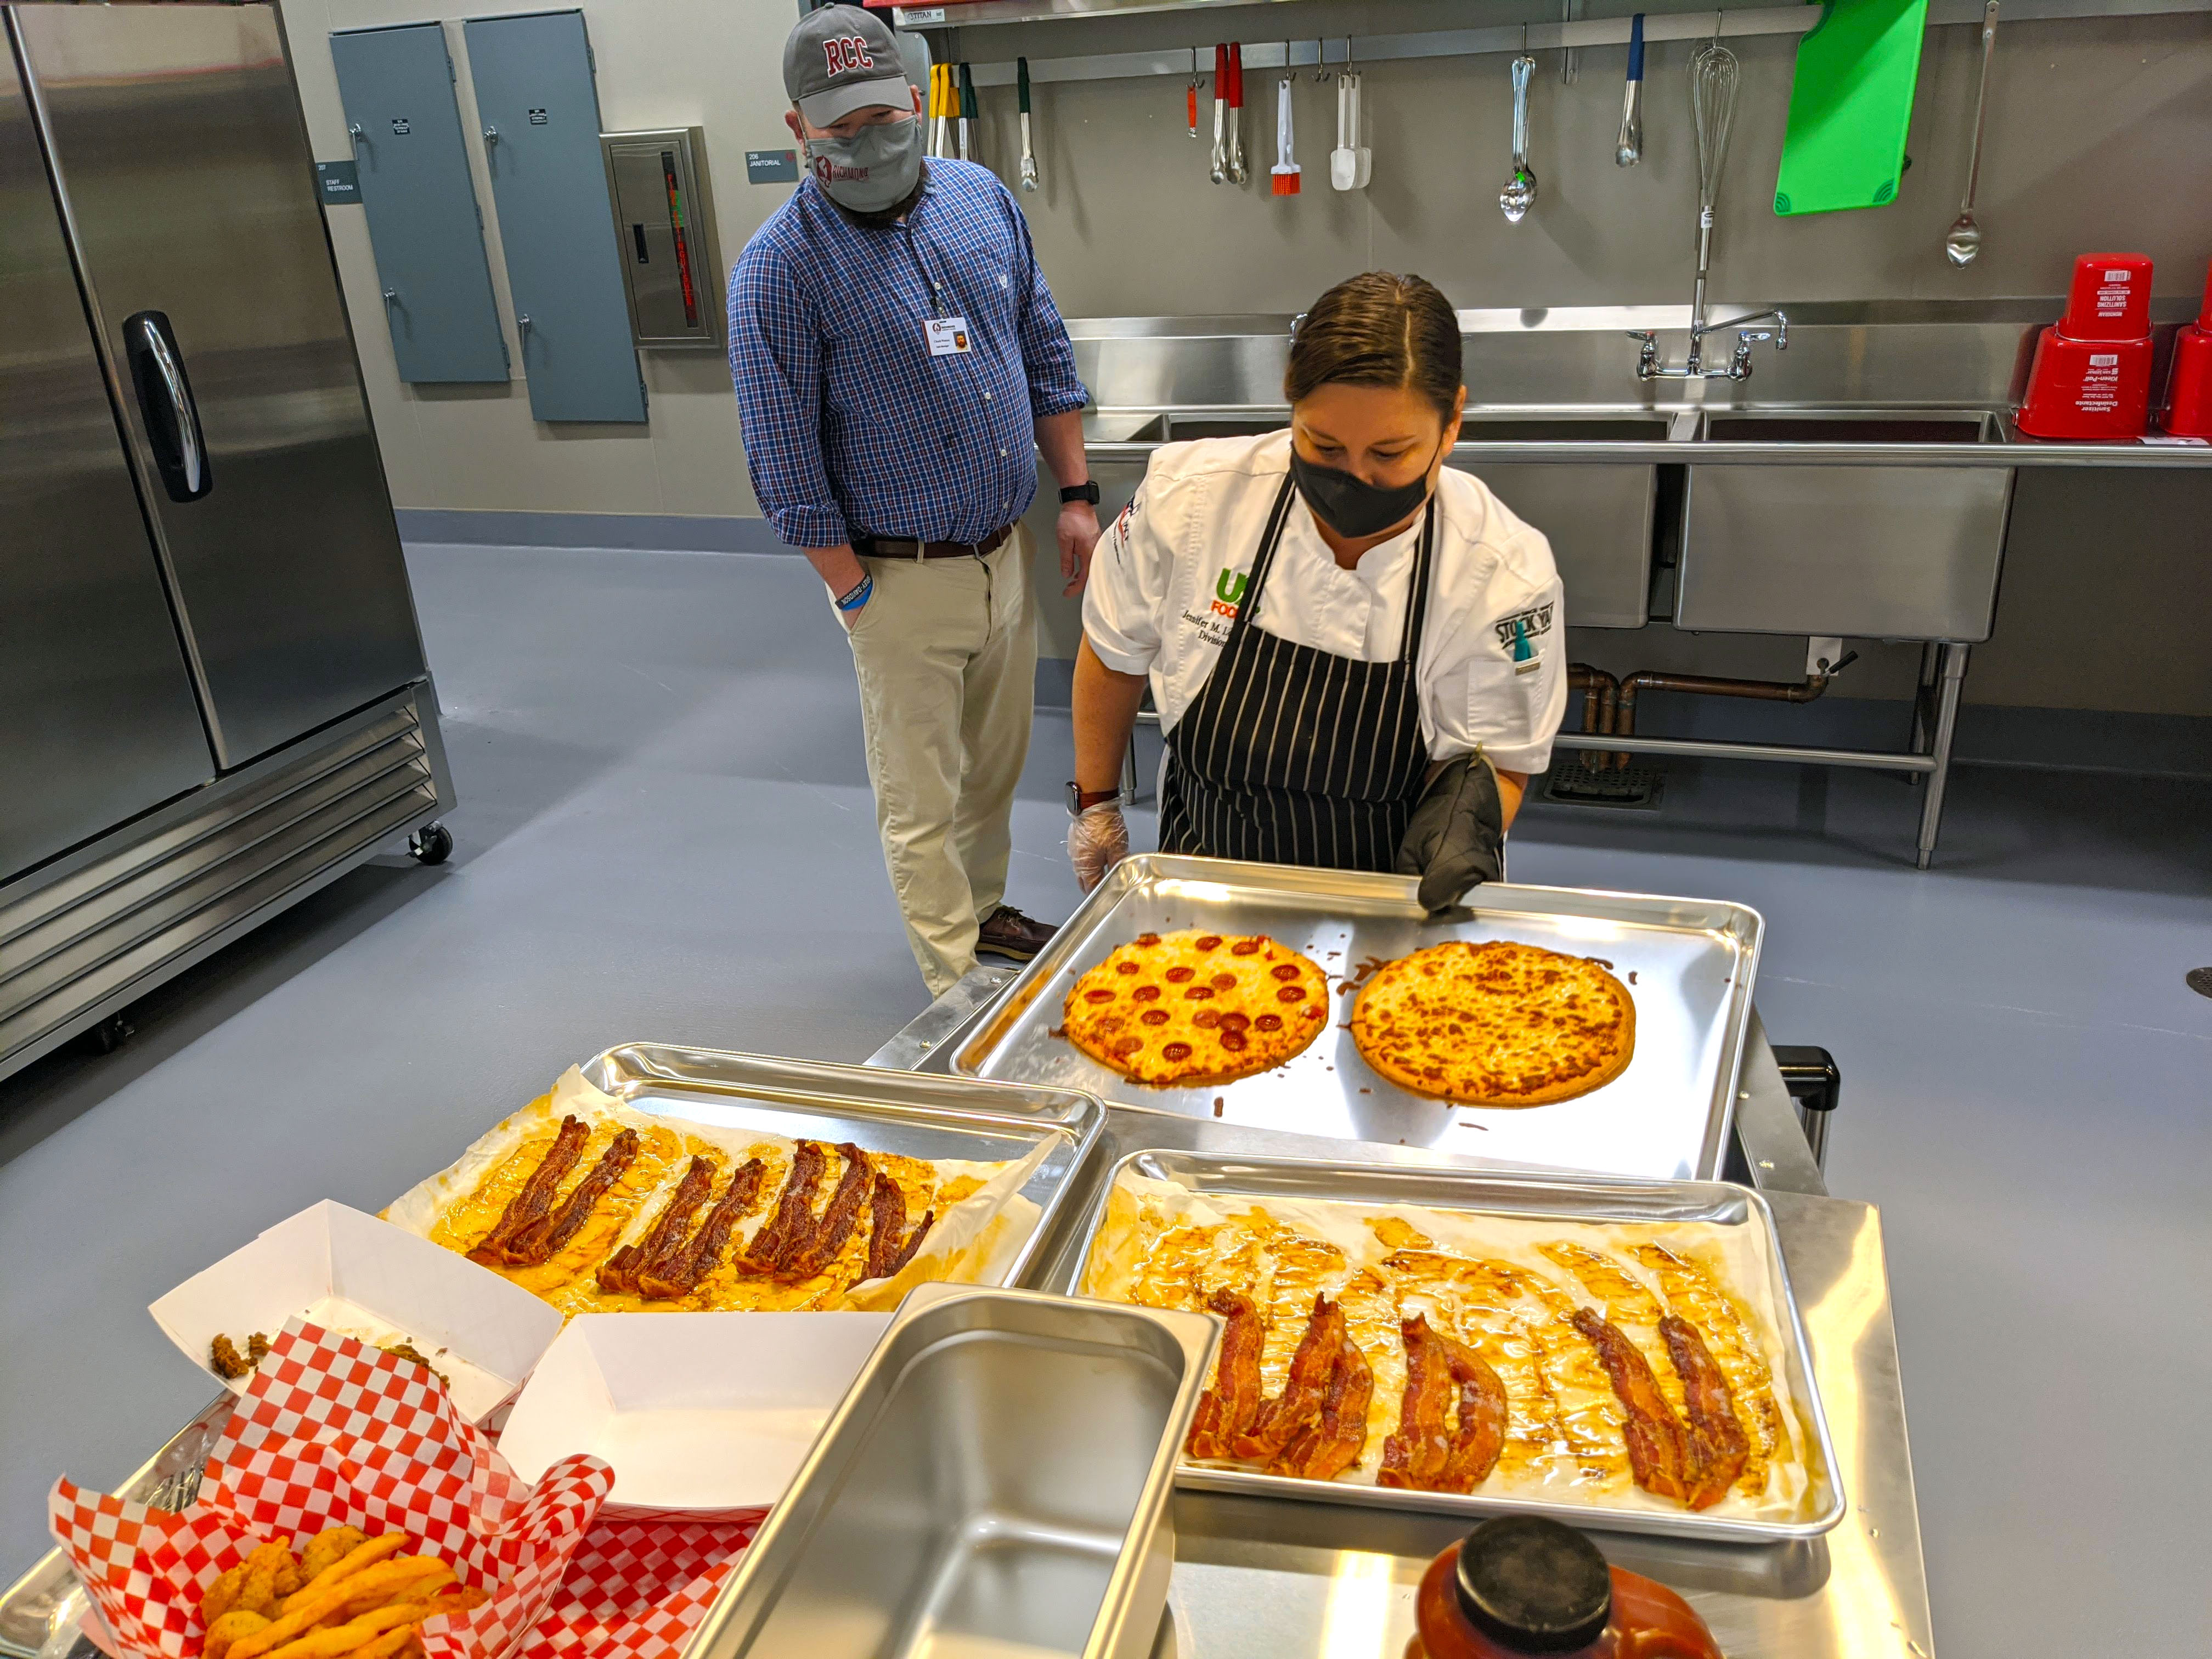 Chef pulls pizzas out of oven